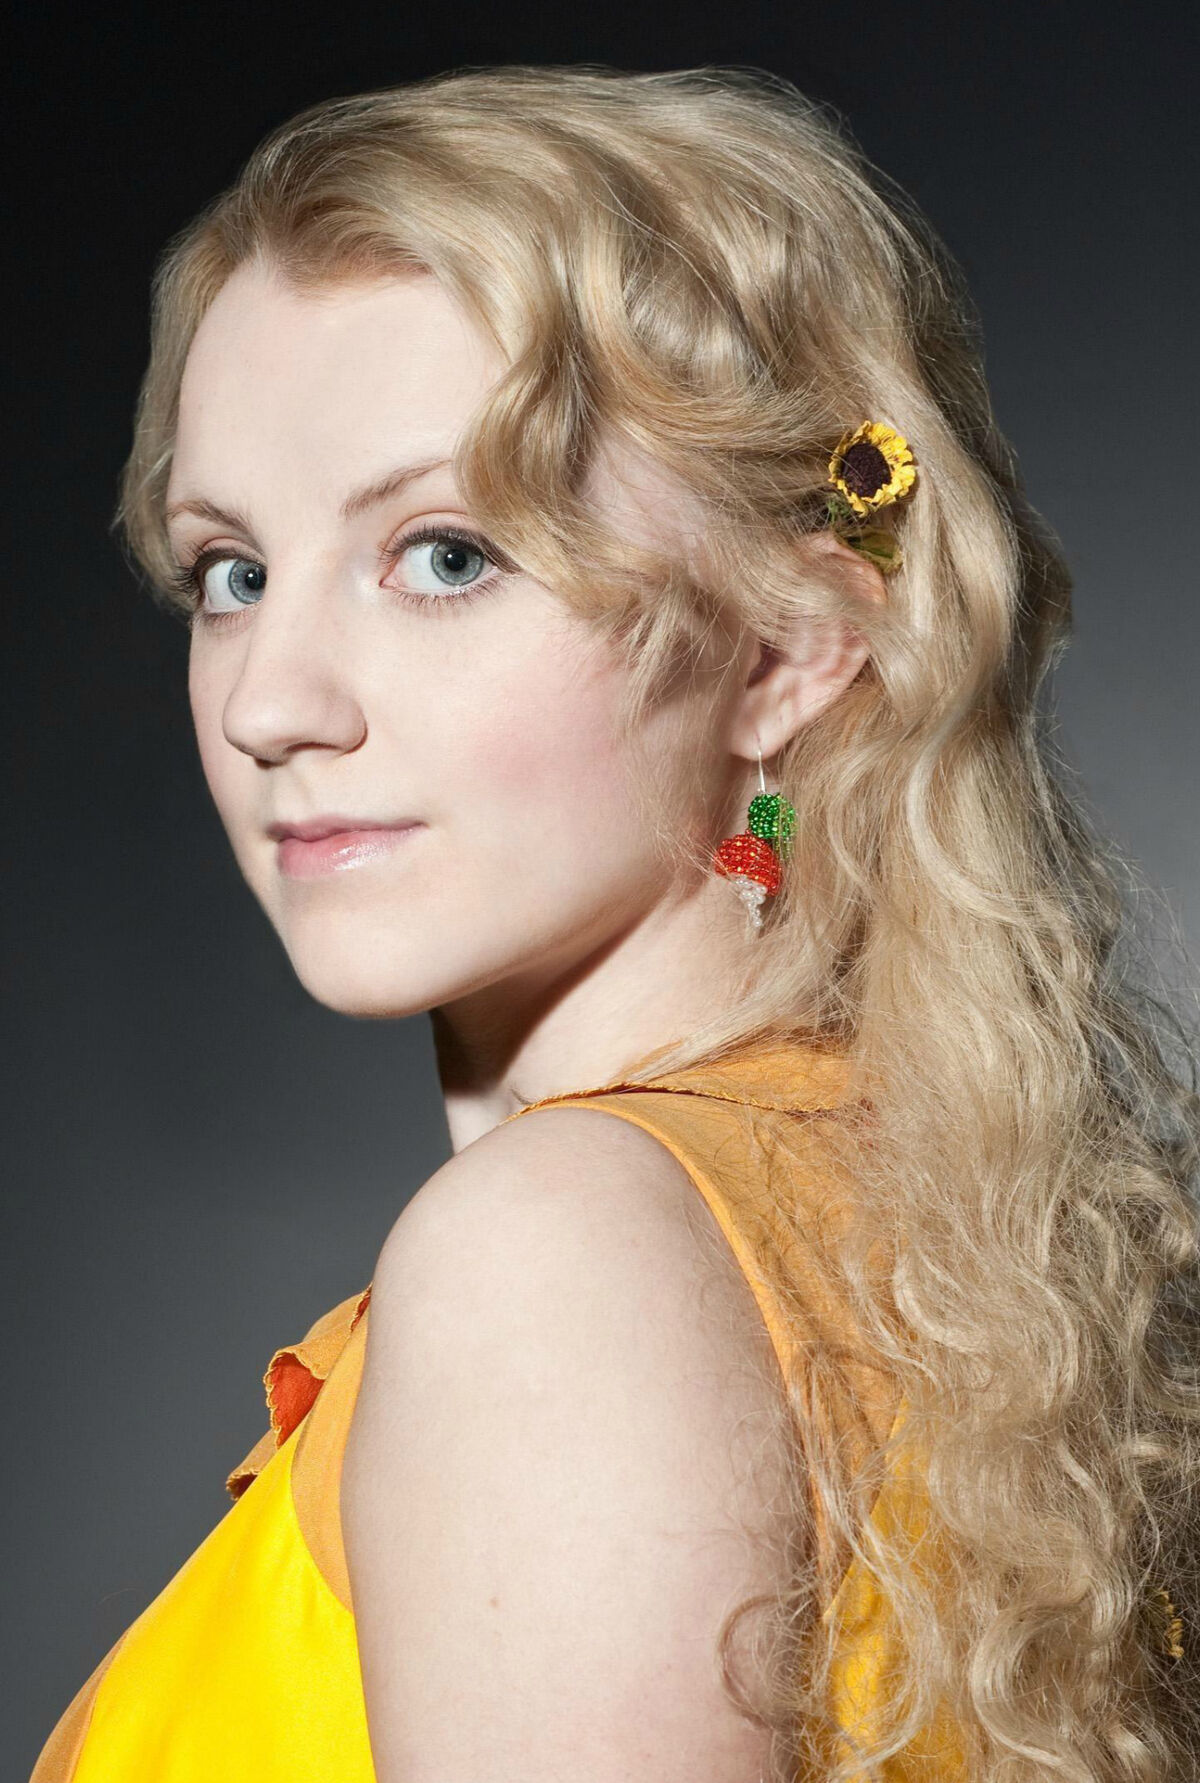 Harry Potter Movies: The Mysterious and Charming Luna Lovegood 2